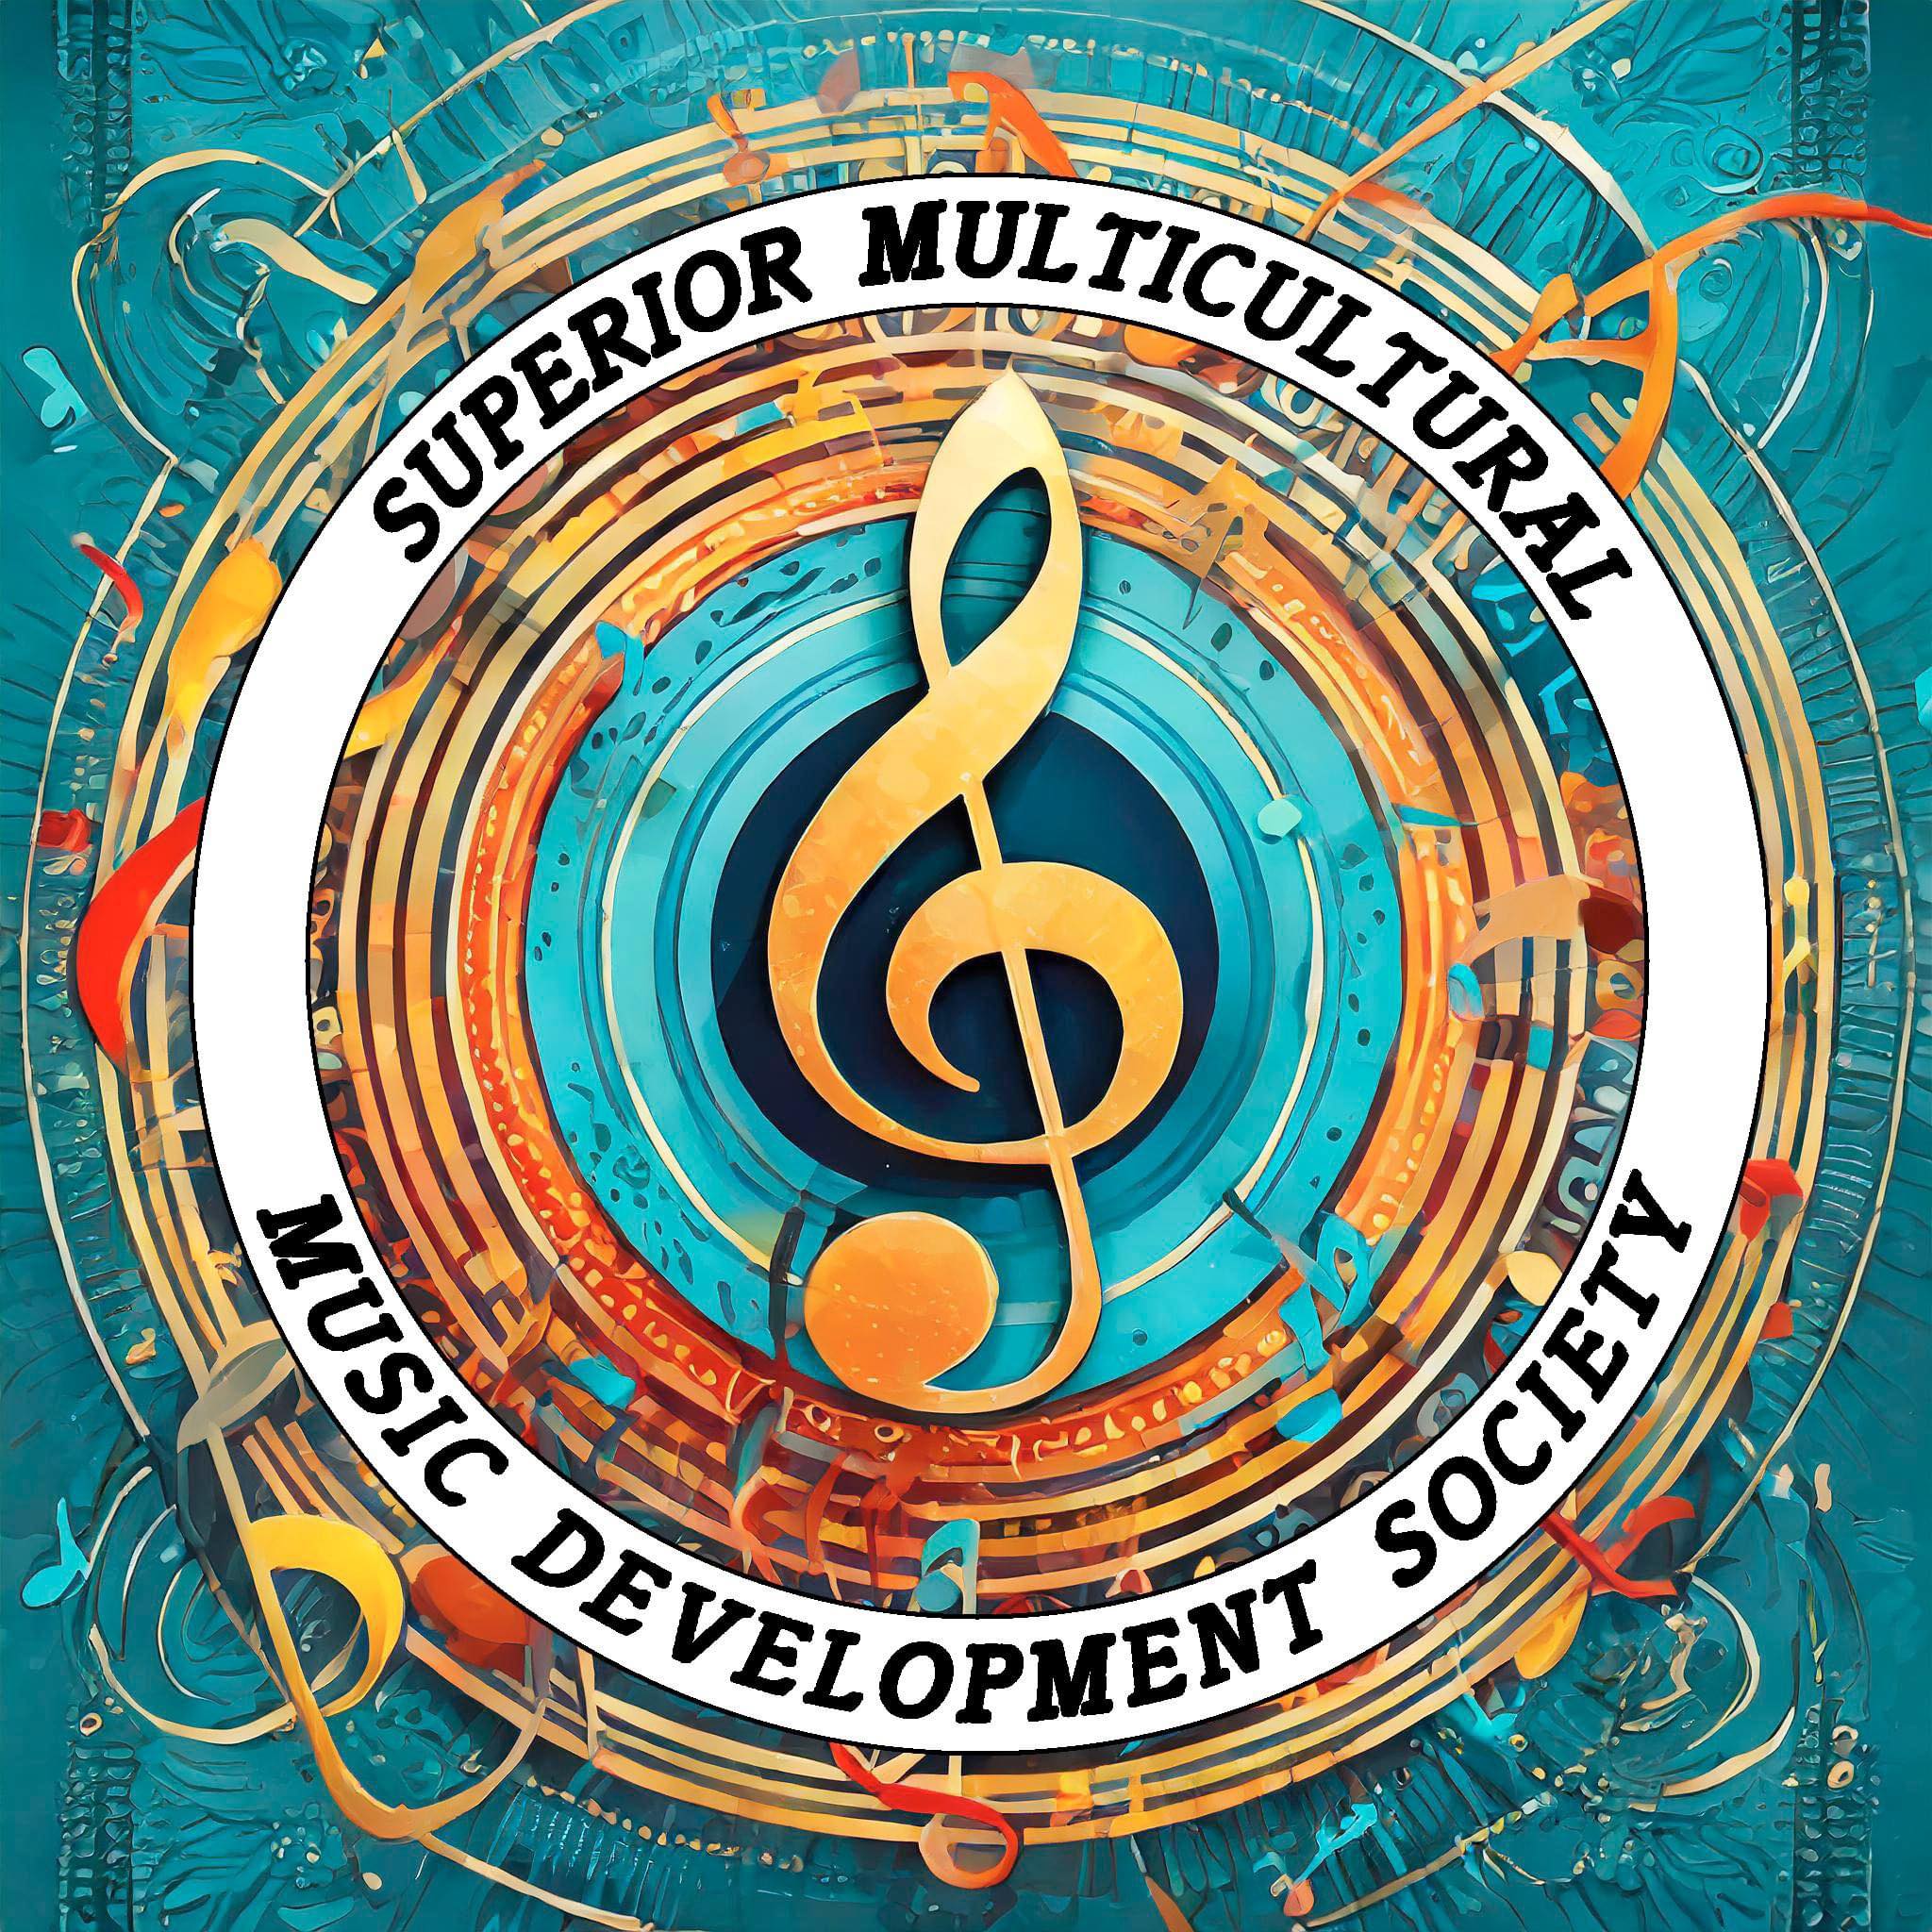 Superior Multicultural Music Development Society